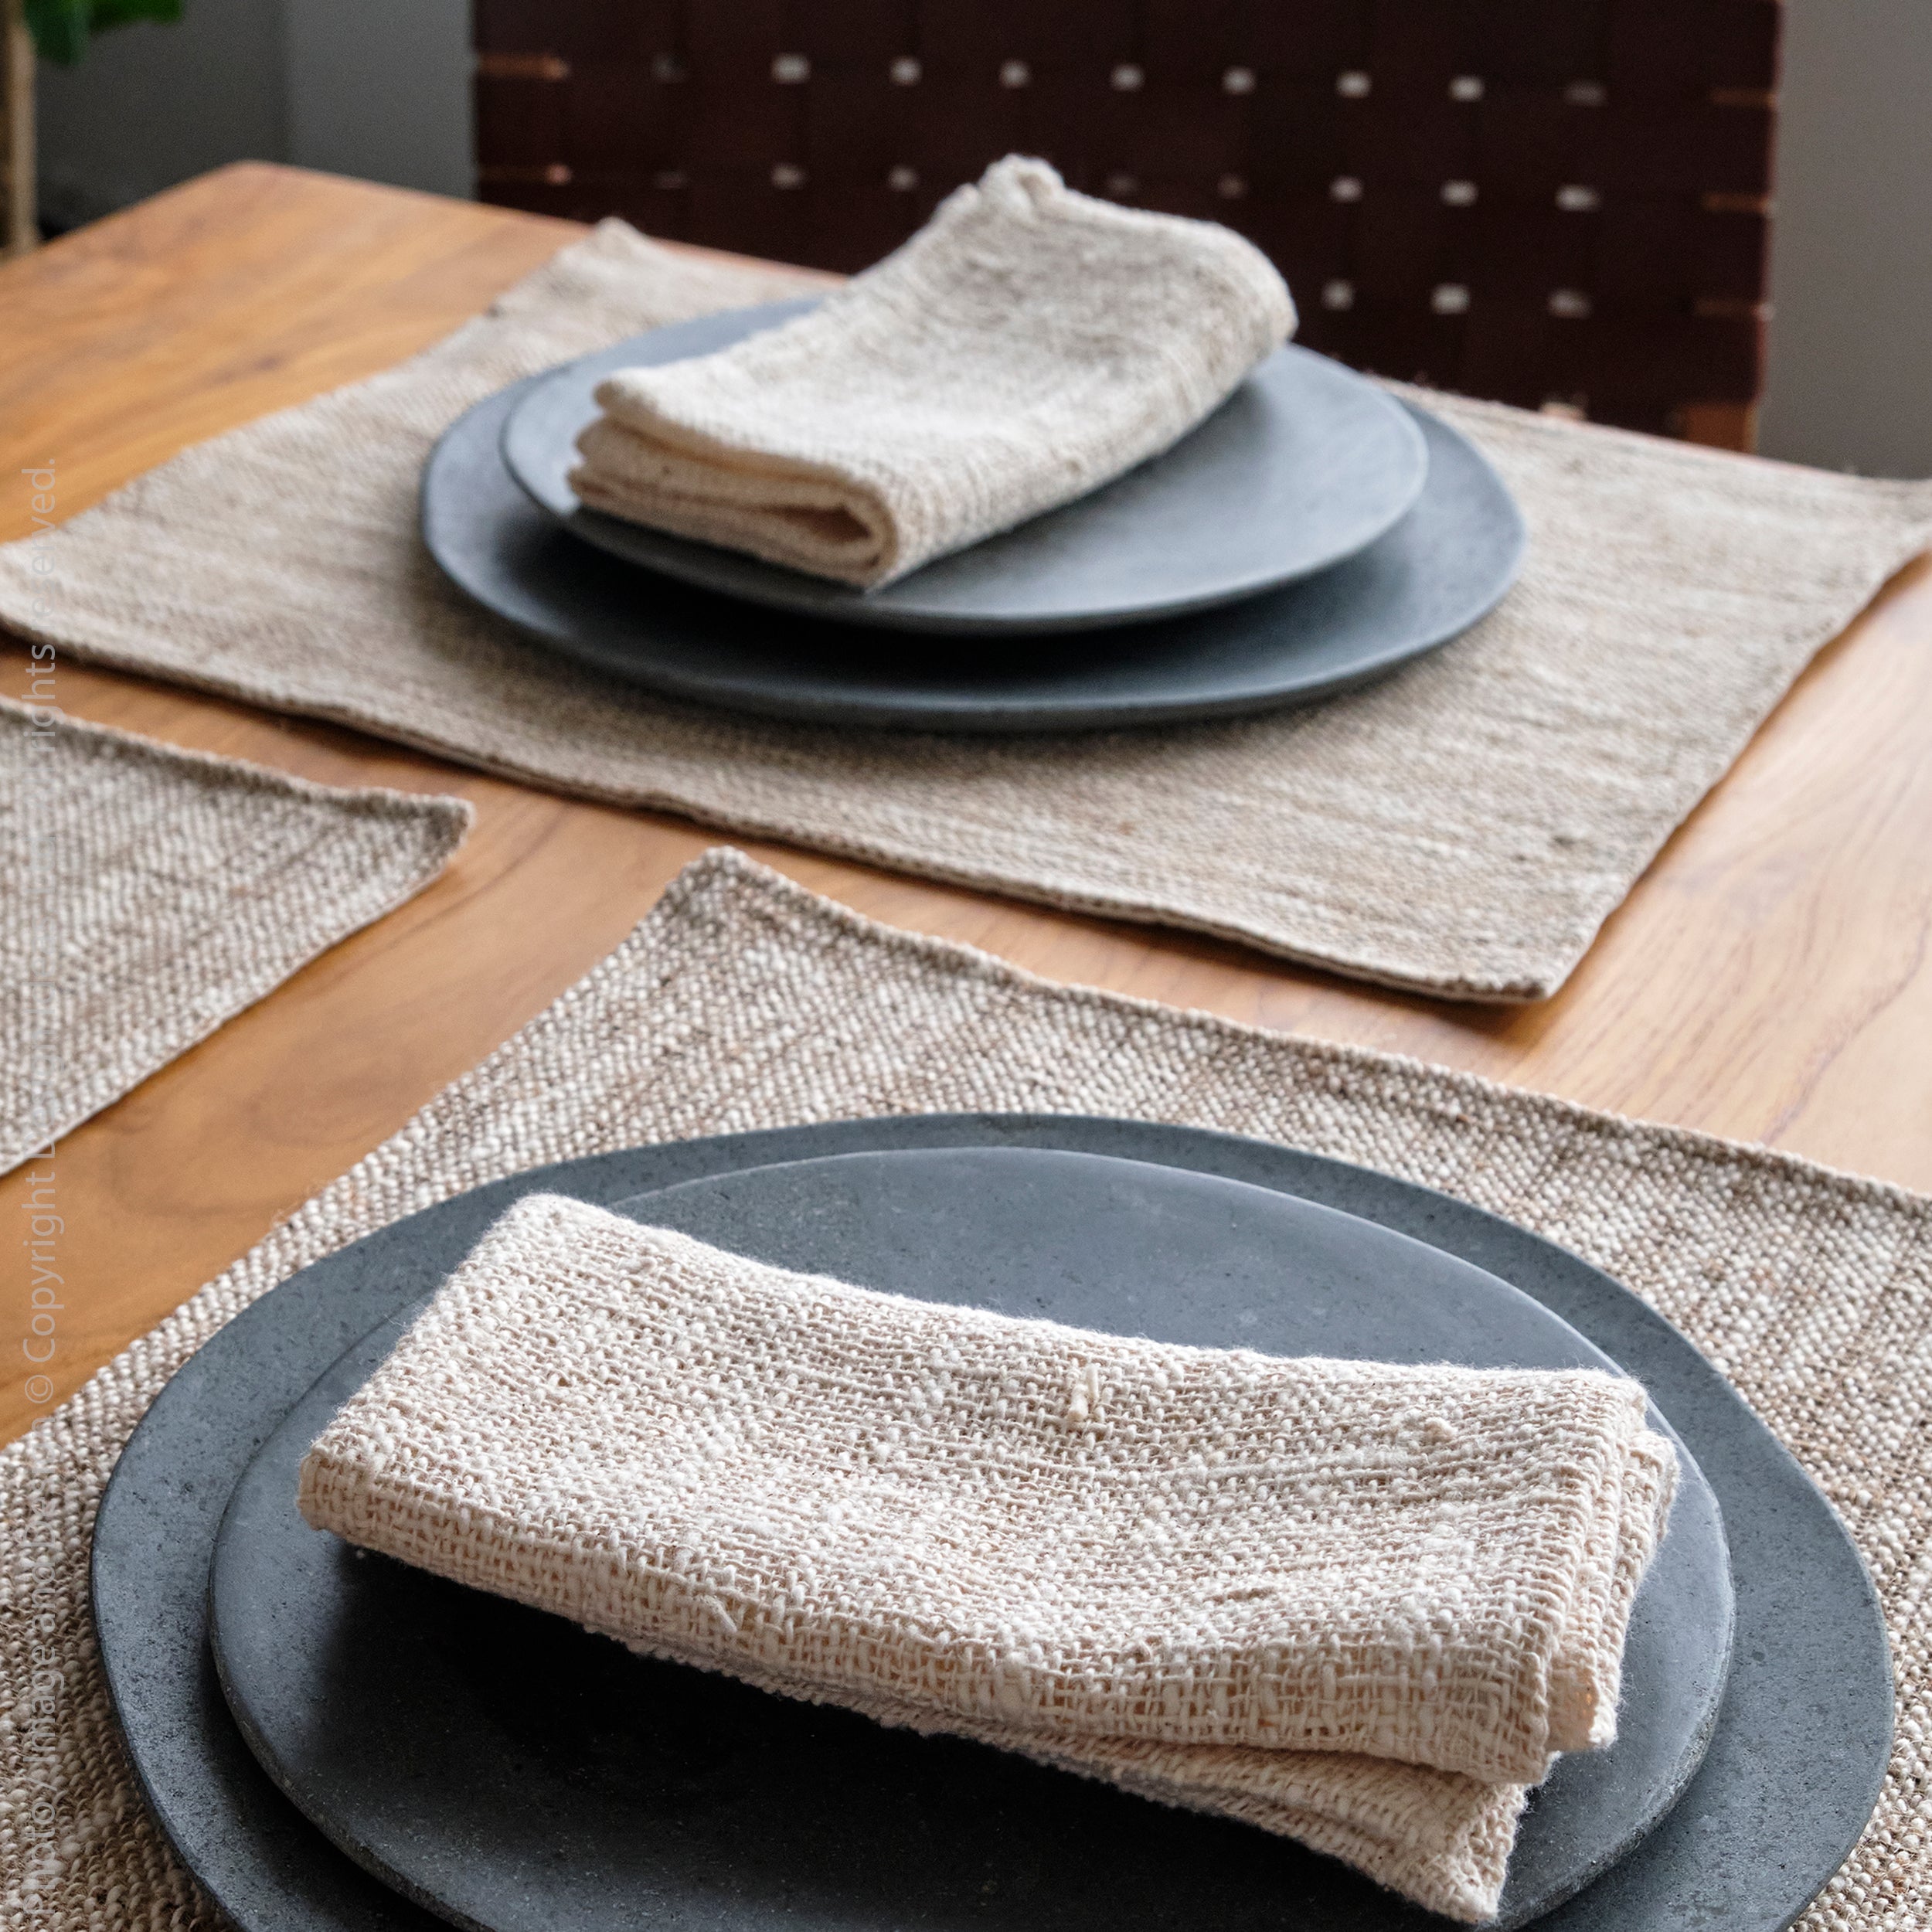 Capri Loosely Woven Cotton Placemat natural Color | Image 2 | From the Capri Collection | Masterfully Loosely Woven with natural cotton for long lasting use | Available in natural color | texxture home